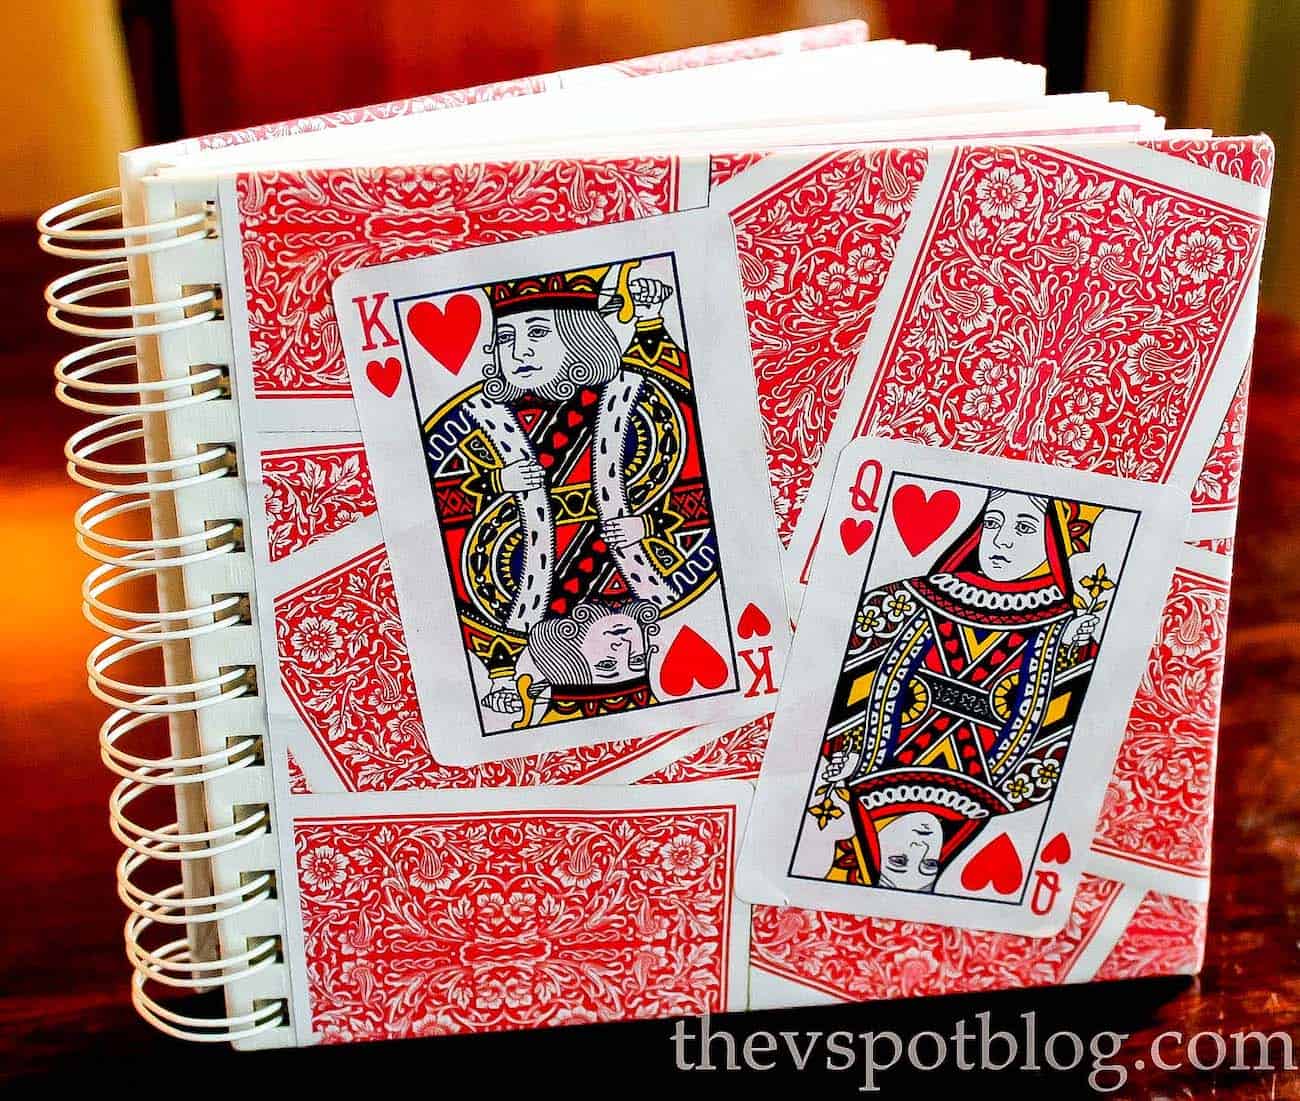 Journal decorated with playing cards for a Valentine's Day DIY gift idea